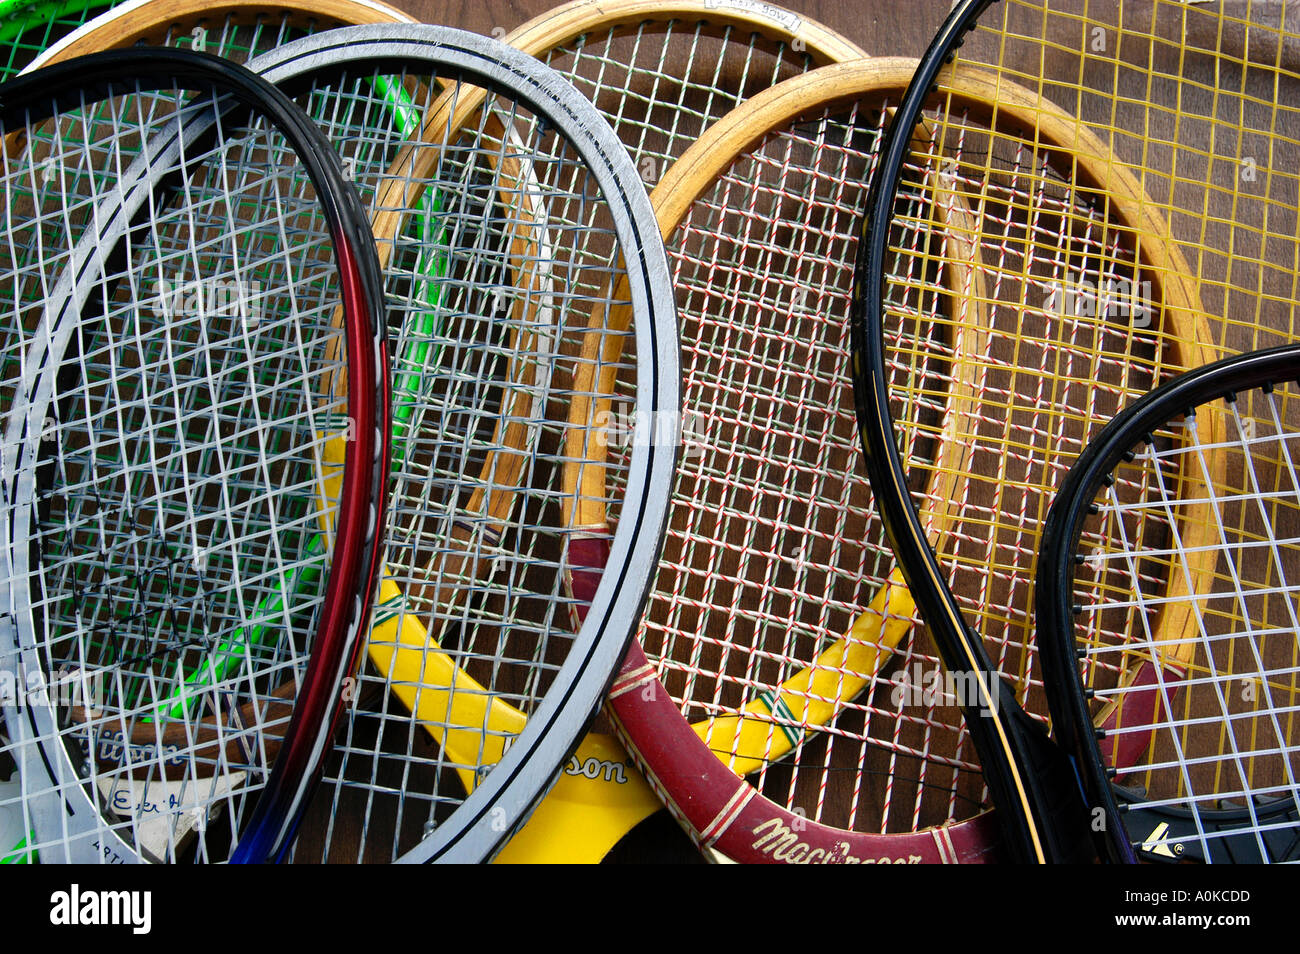 Patterns of Colorful Old Tennis Rackets Stock Photo